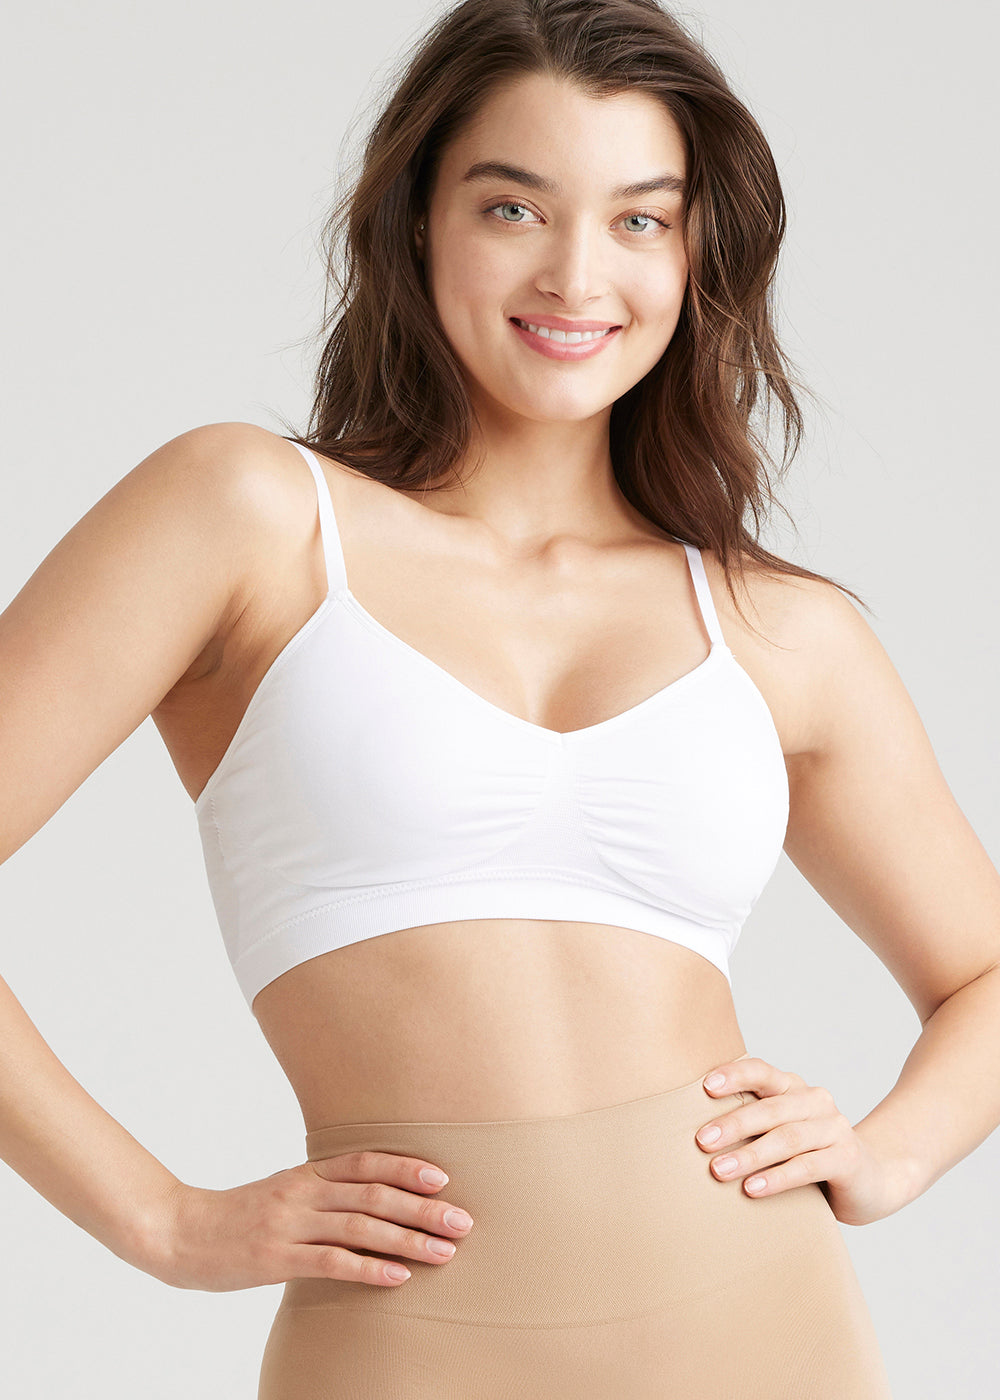 V-Neck Bralette – Seamless in White worn by woman facing forward with hands on hip Yummie